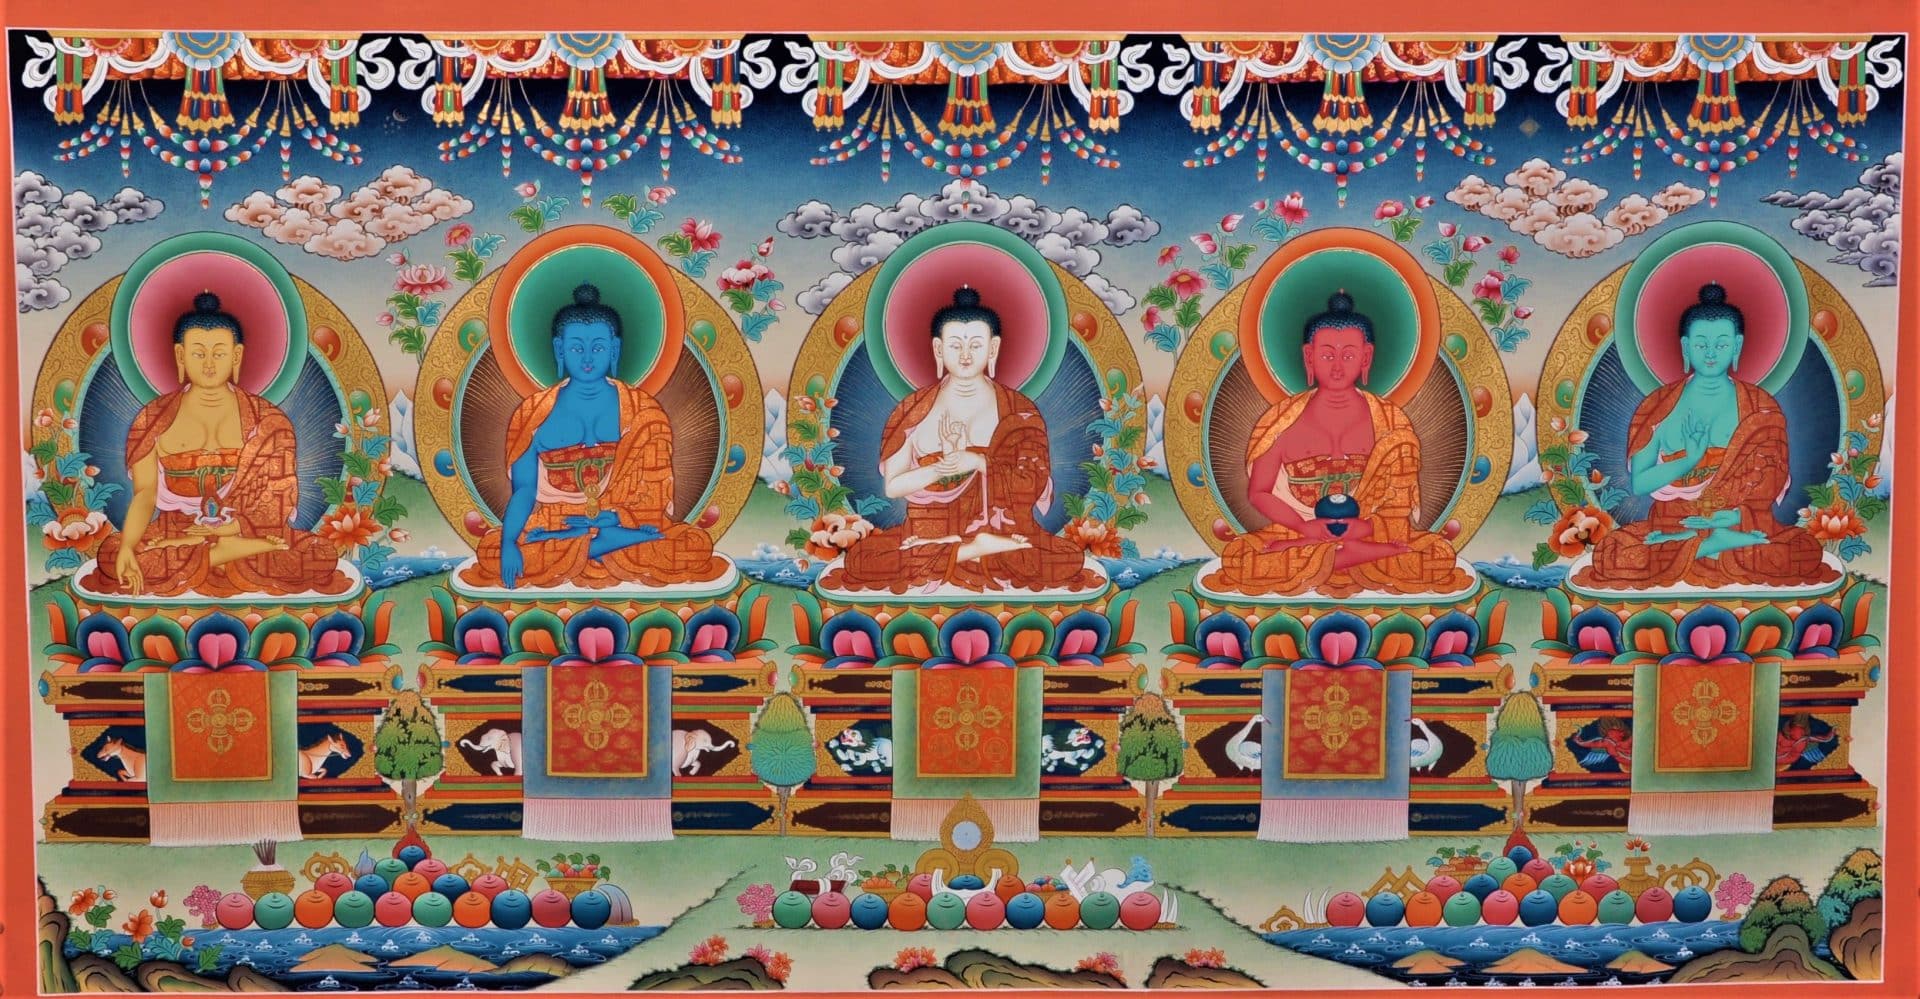 A Two-Day Teaching on the Recitation of the 35 Buddhas with H.E. Demo Rinpoche